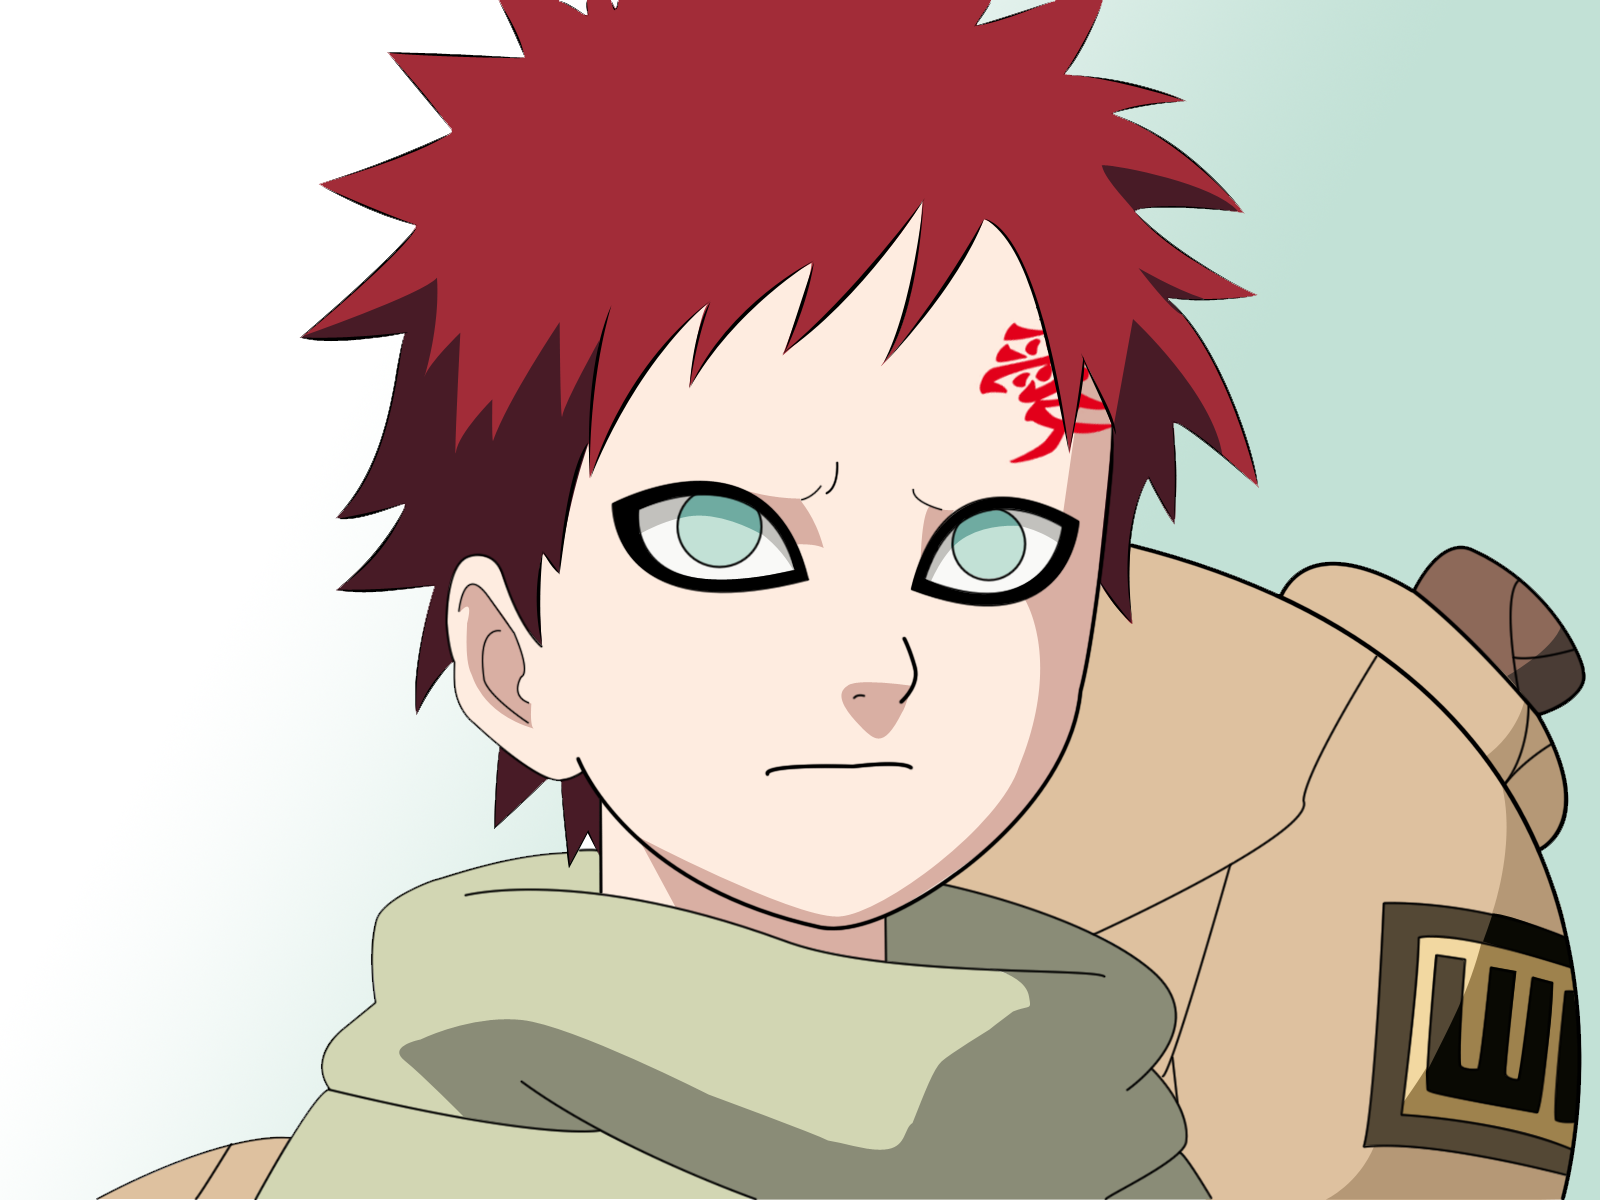 Young Gaara of the Sand | Anime Images